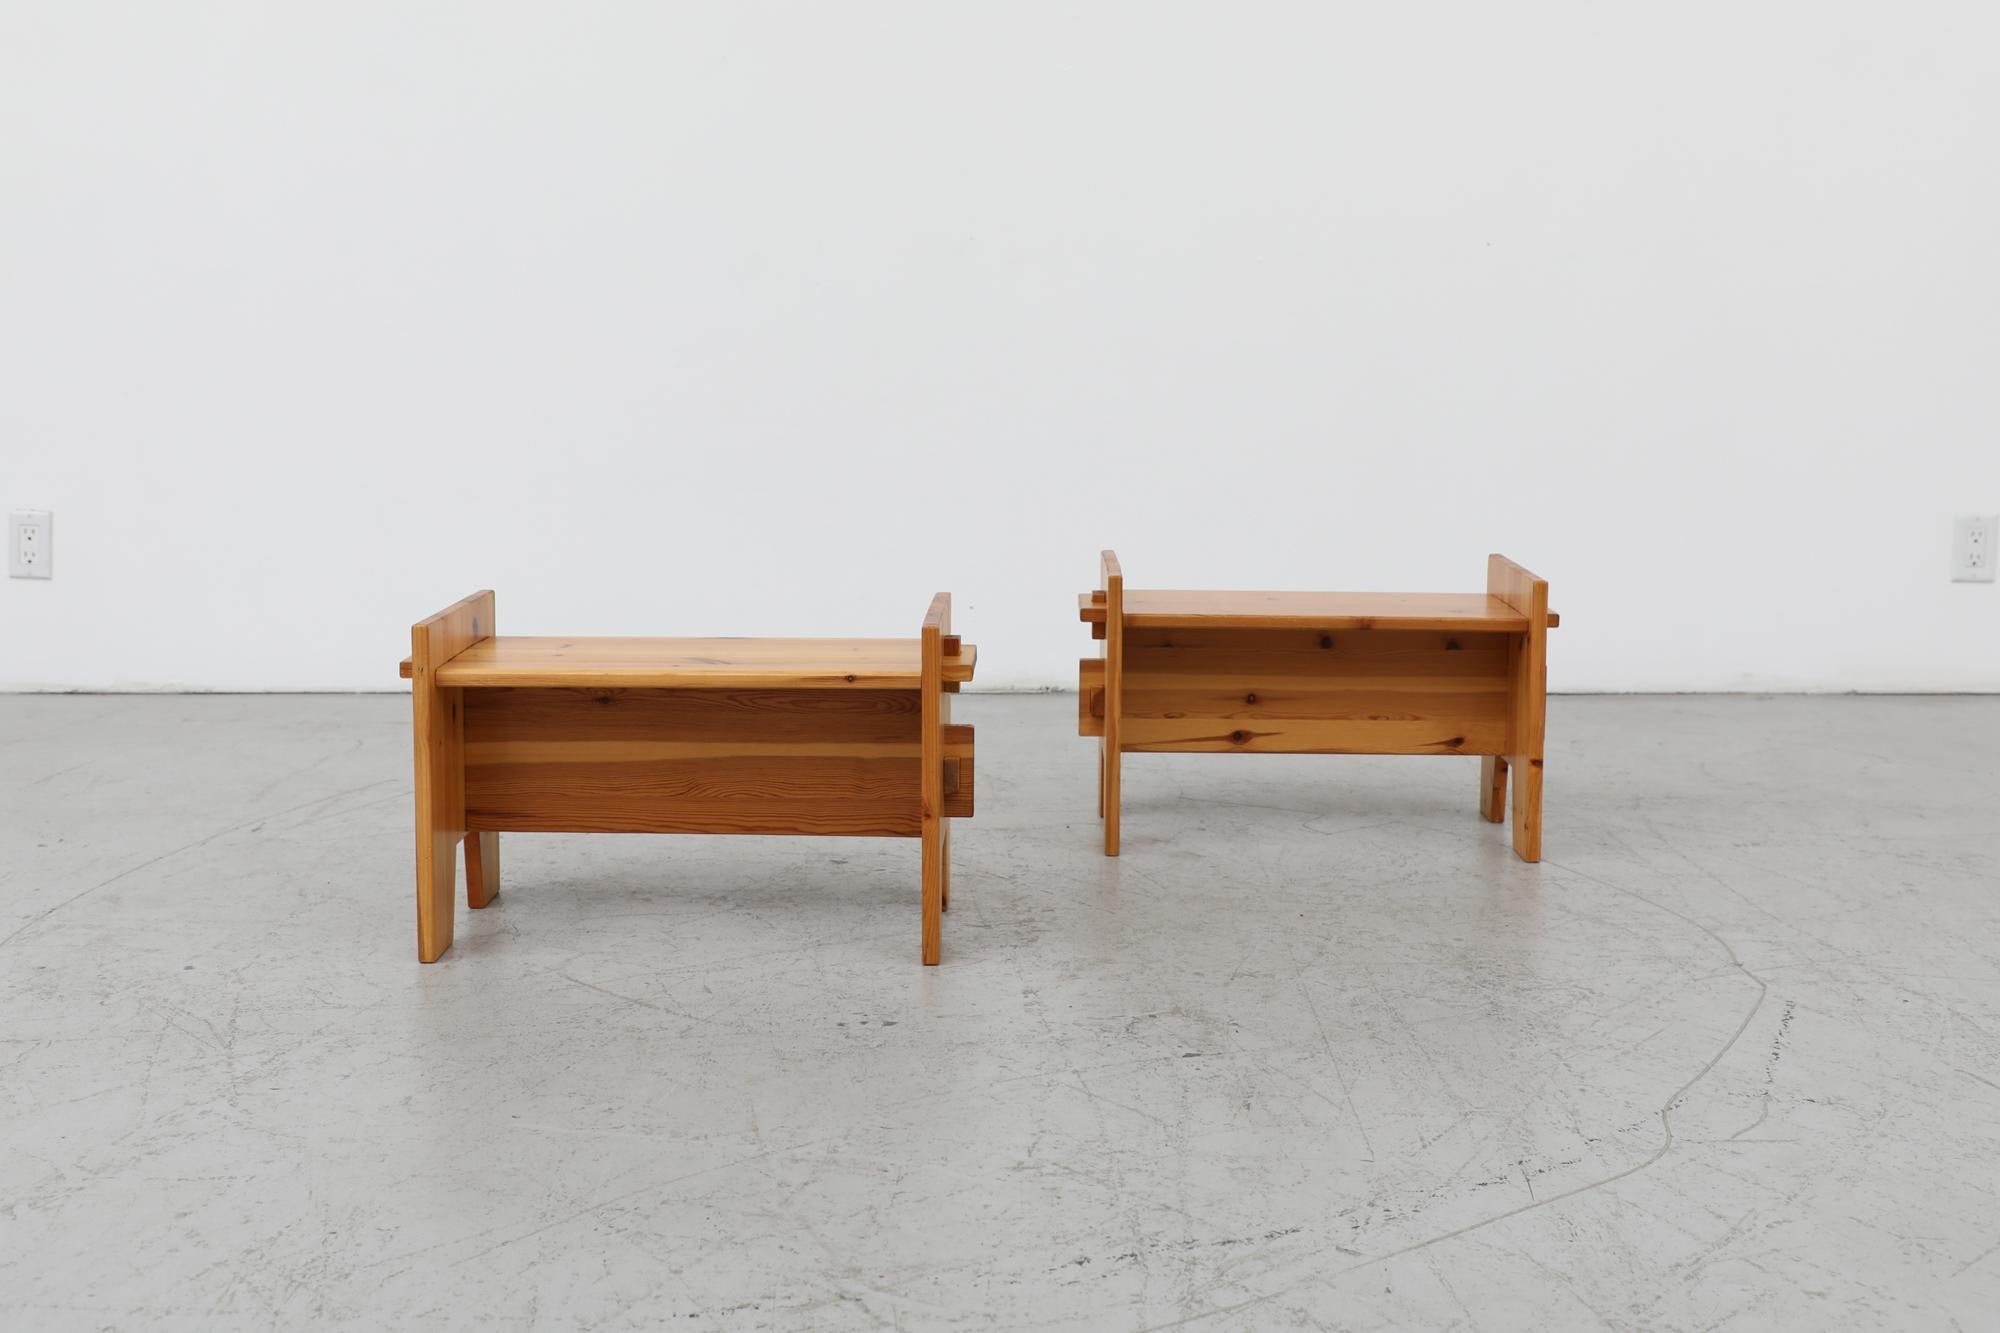 Two Mid-Century solid oak benches with trestle bases. Lightly refinished, in otherwise original condition with some visible wear consistent with their age and use.